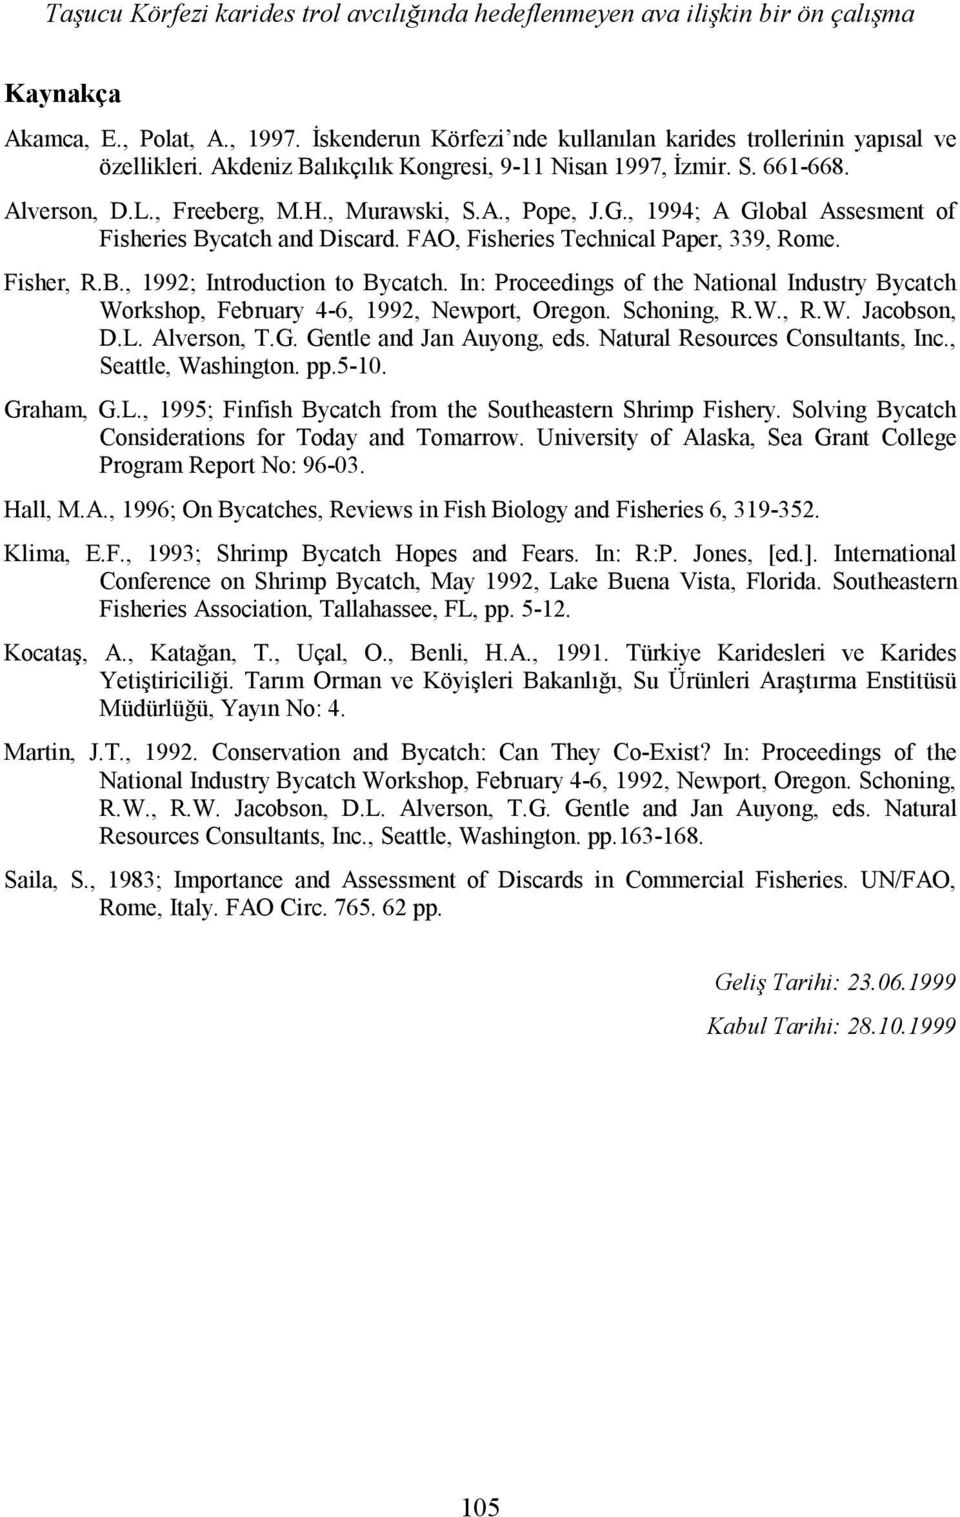 FAO, Fisheries Technical Paper, 339, Rome. Fisher, R.B., 1992; Introduction to Bycatch. In: Proceedings of the National Industry Bycatch Workshop, February 4-6, 1992, Newport, Oregon. Schoning, R.W., R.W. Jacobson, D.